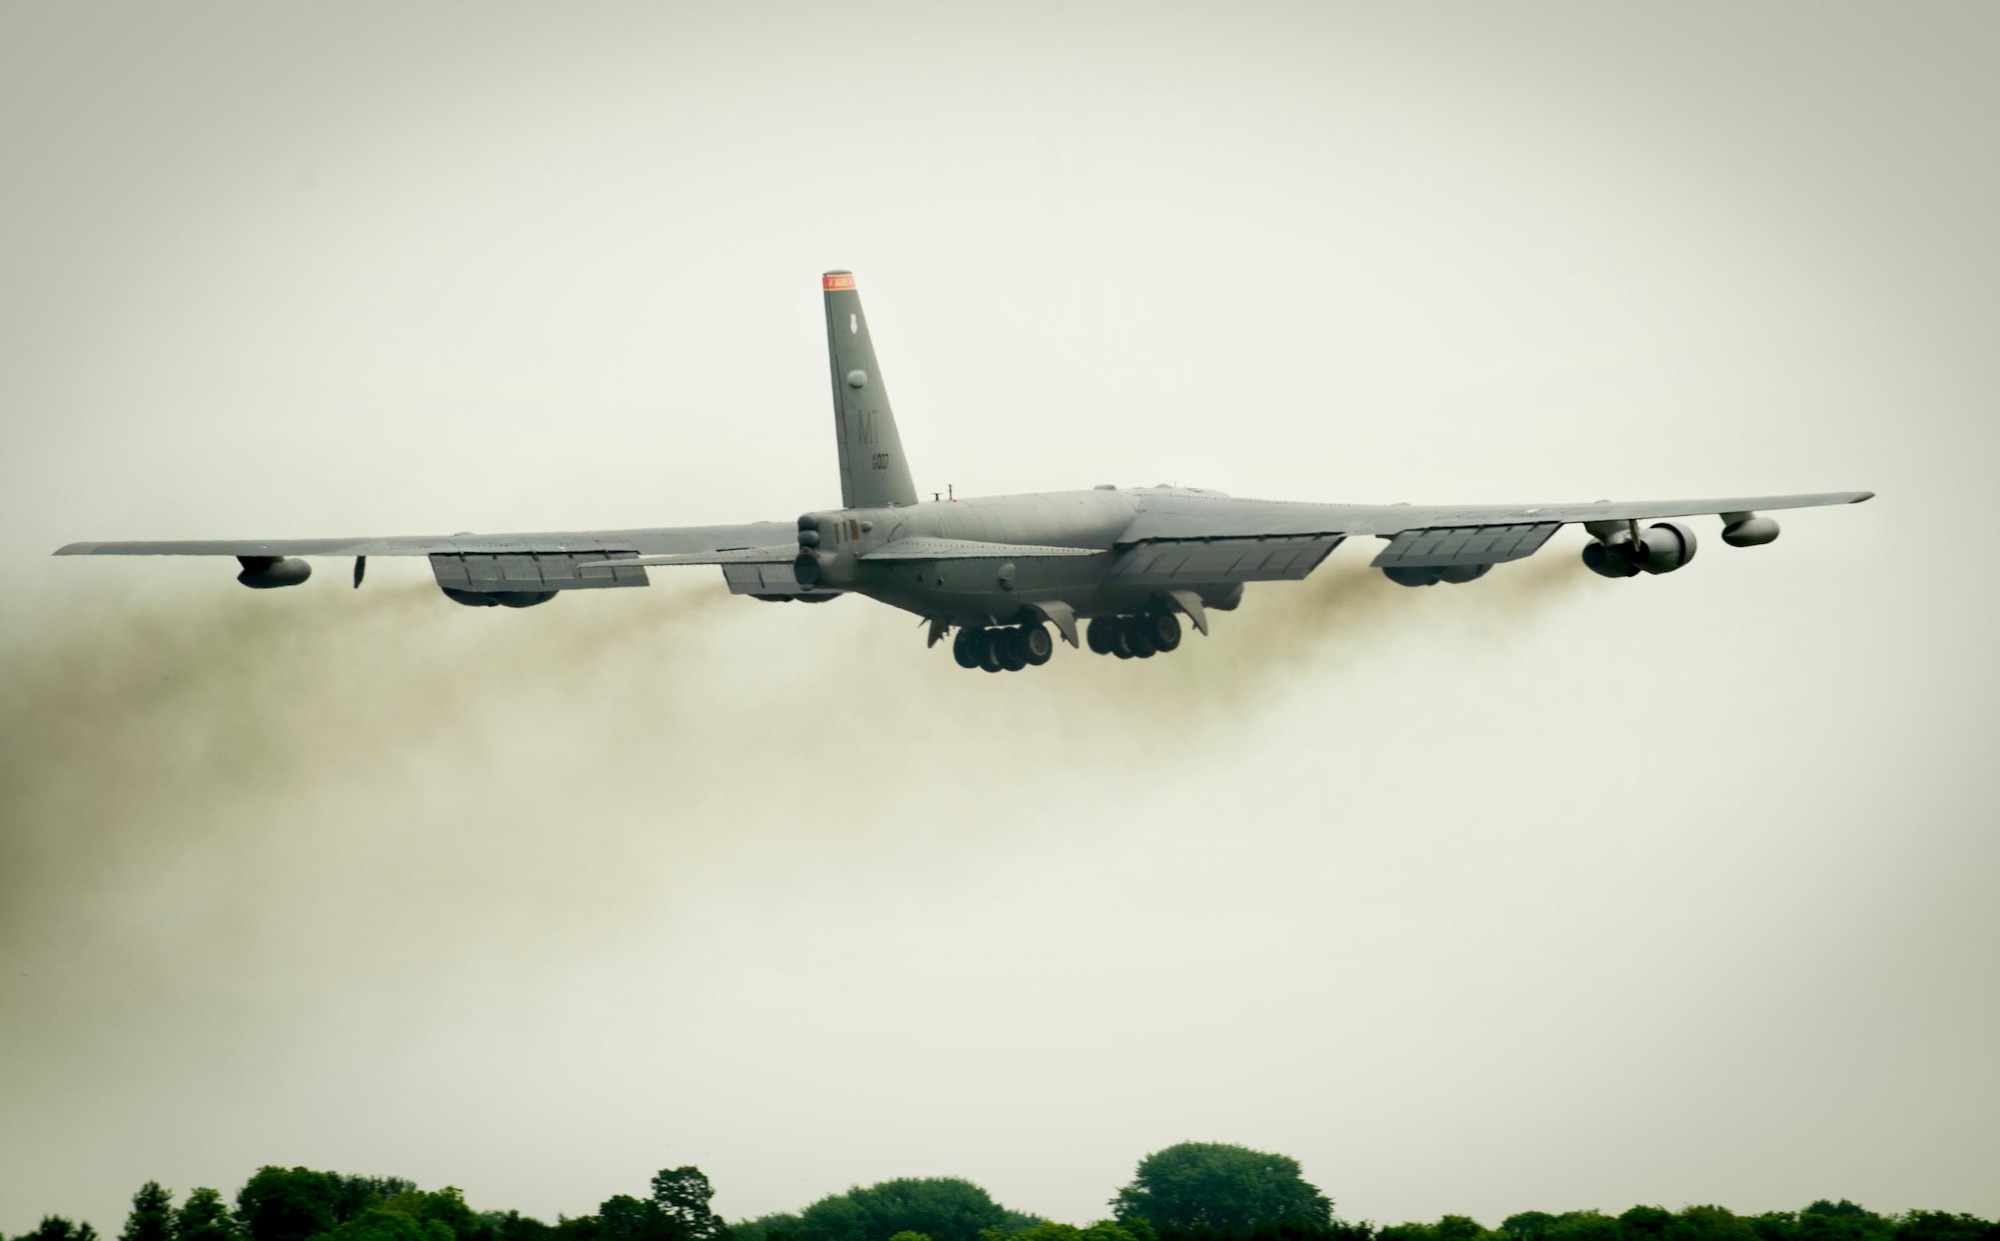 A B-52H Stratofortress from Minot Air Force Base, N.D., takes off from Royal Air Force Fairford, United Kingdom, June 7, 2016. Over the next 10 days, the aircrew will be flying more missions in support of BALTOPS 16, along with Saber Strike 16. In addition, the B-52 will be making its appearance in several airshows throughout countries such as Berin, Latvia, Lithuania and Estonia. (U.S. Air Force photo/Senior Airman Sahara L. Fales)